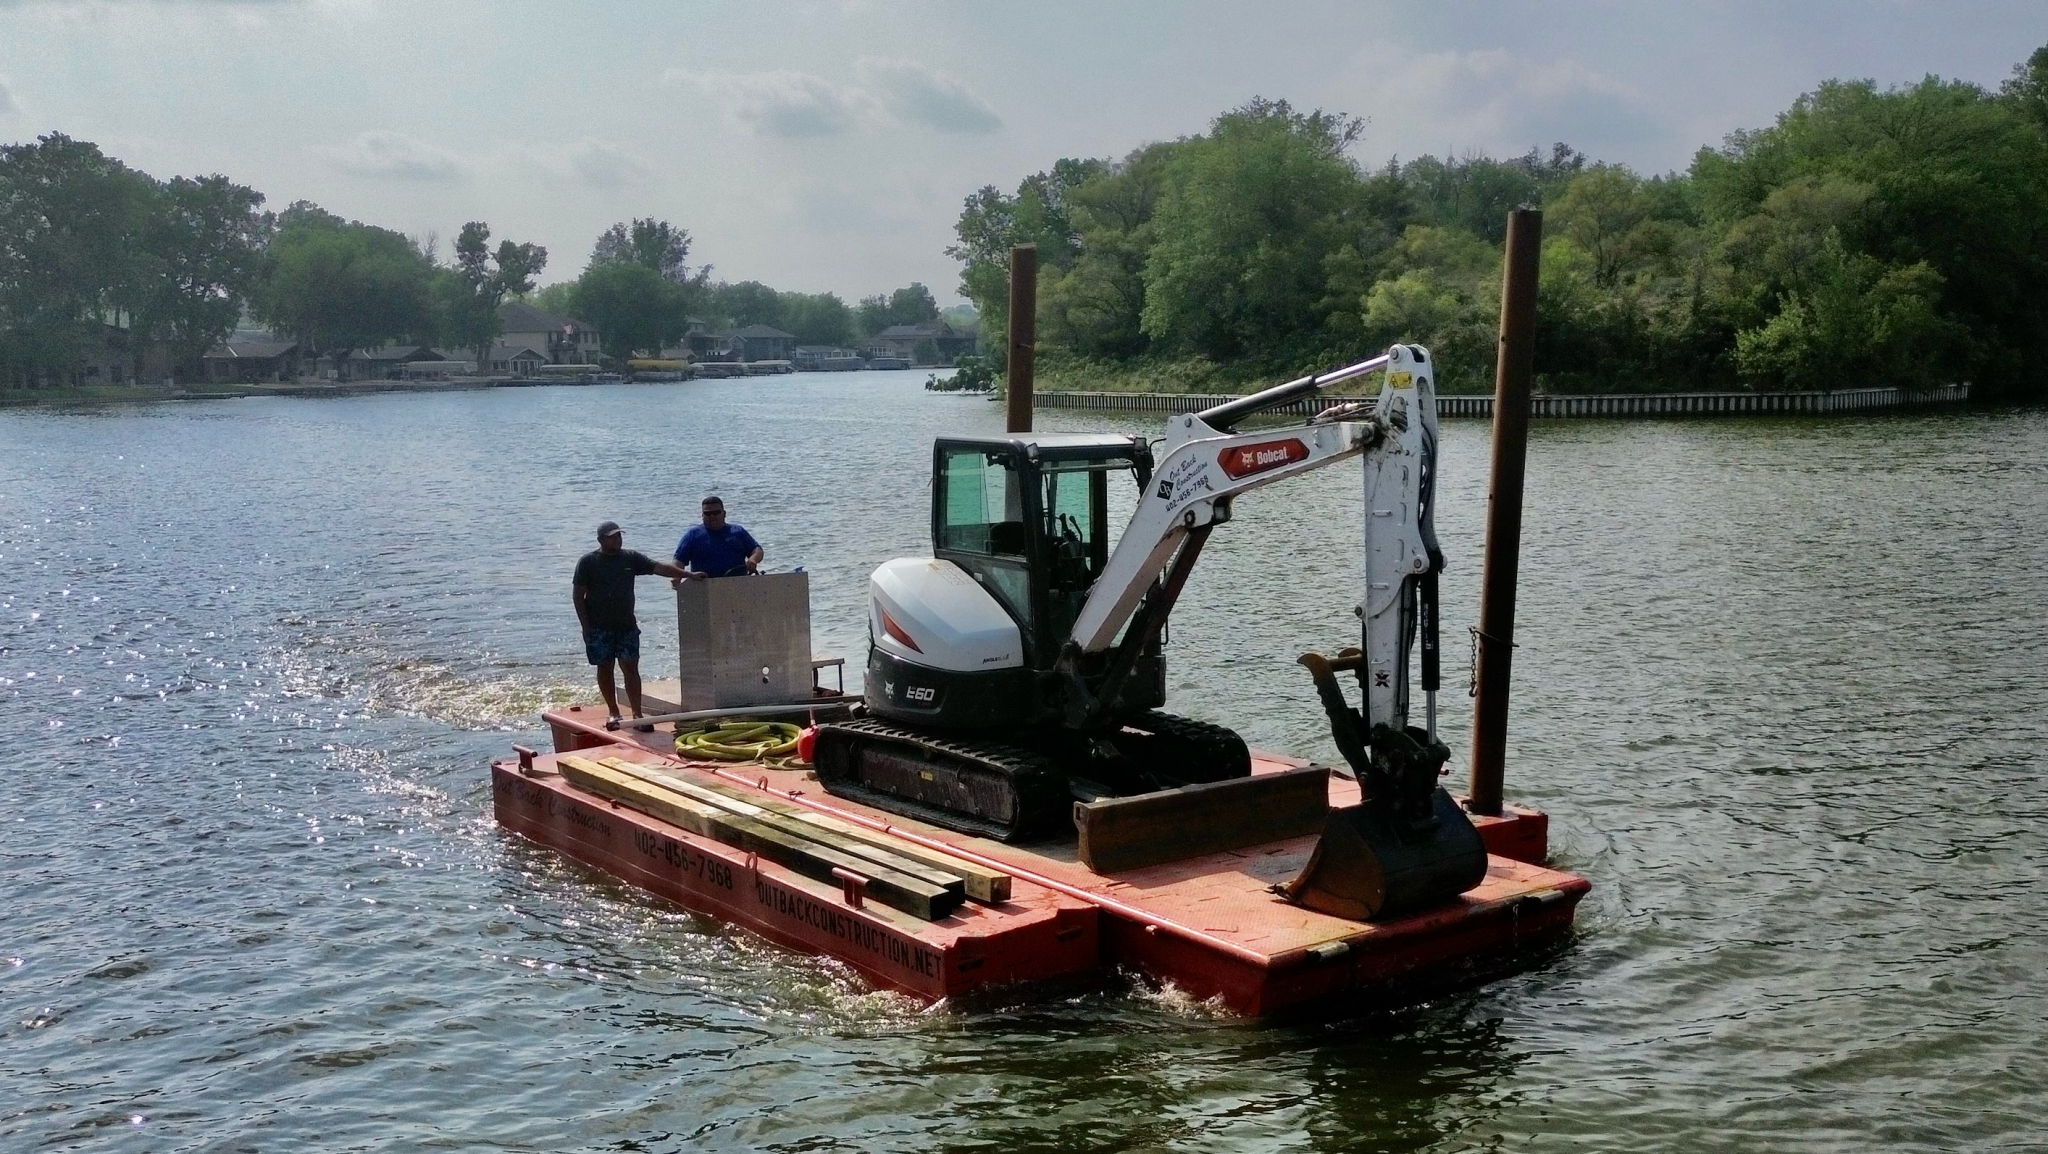 Omaha Barge Construction & Services | Waterfront Property: Barge Work